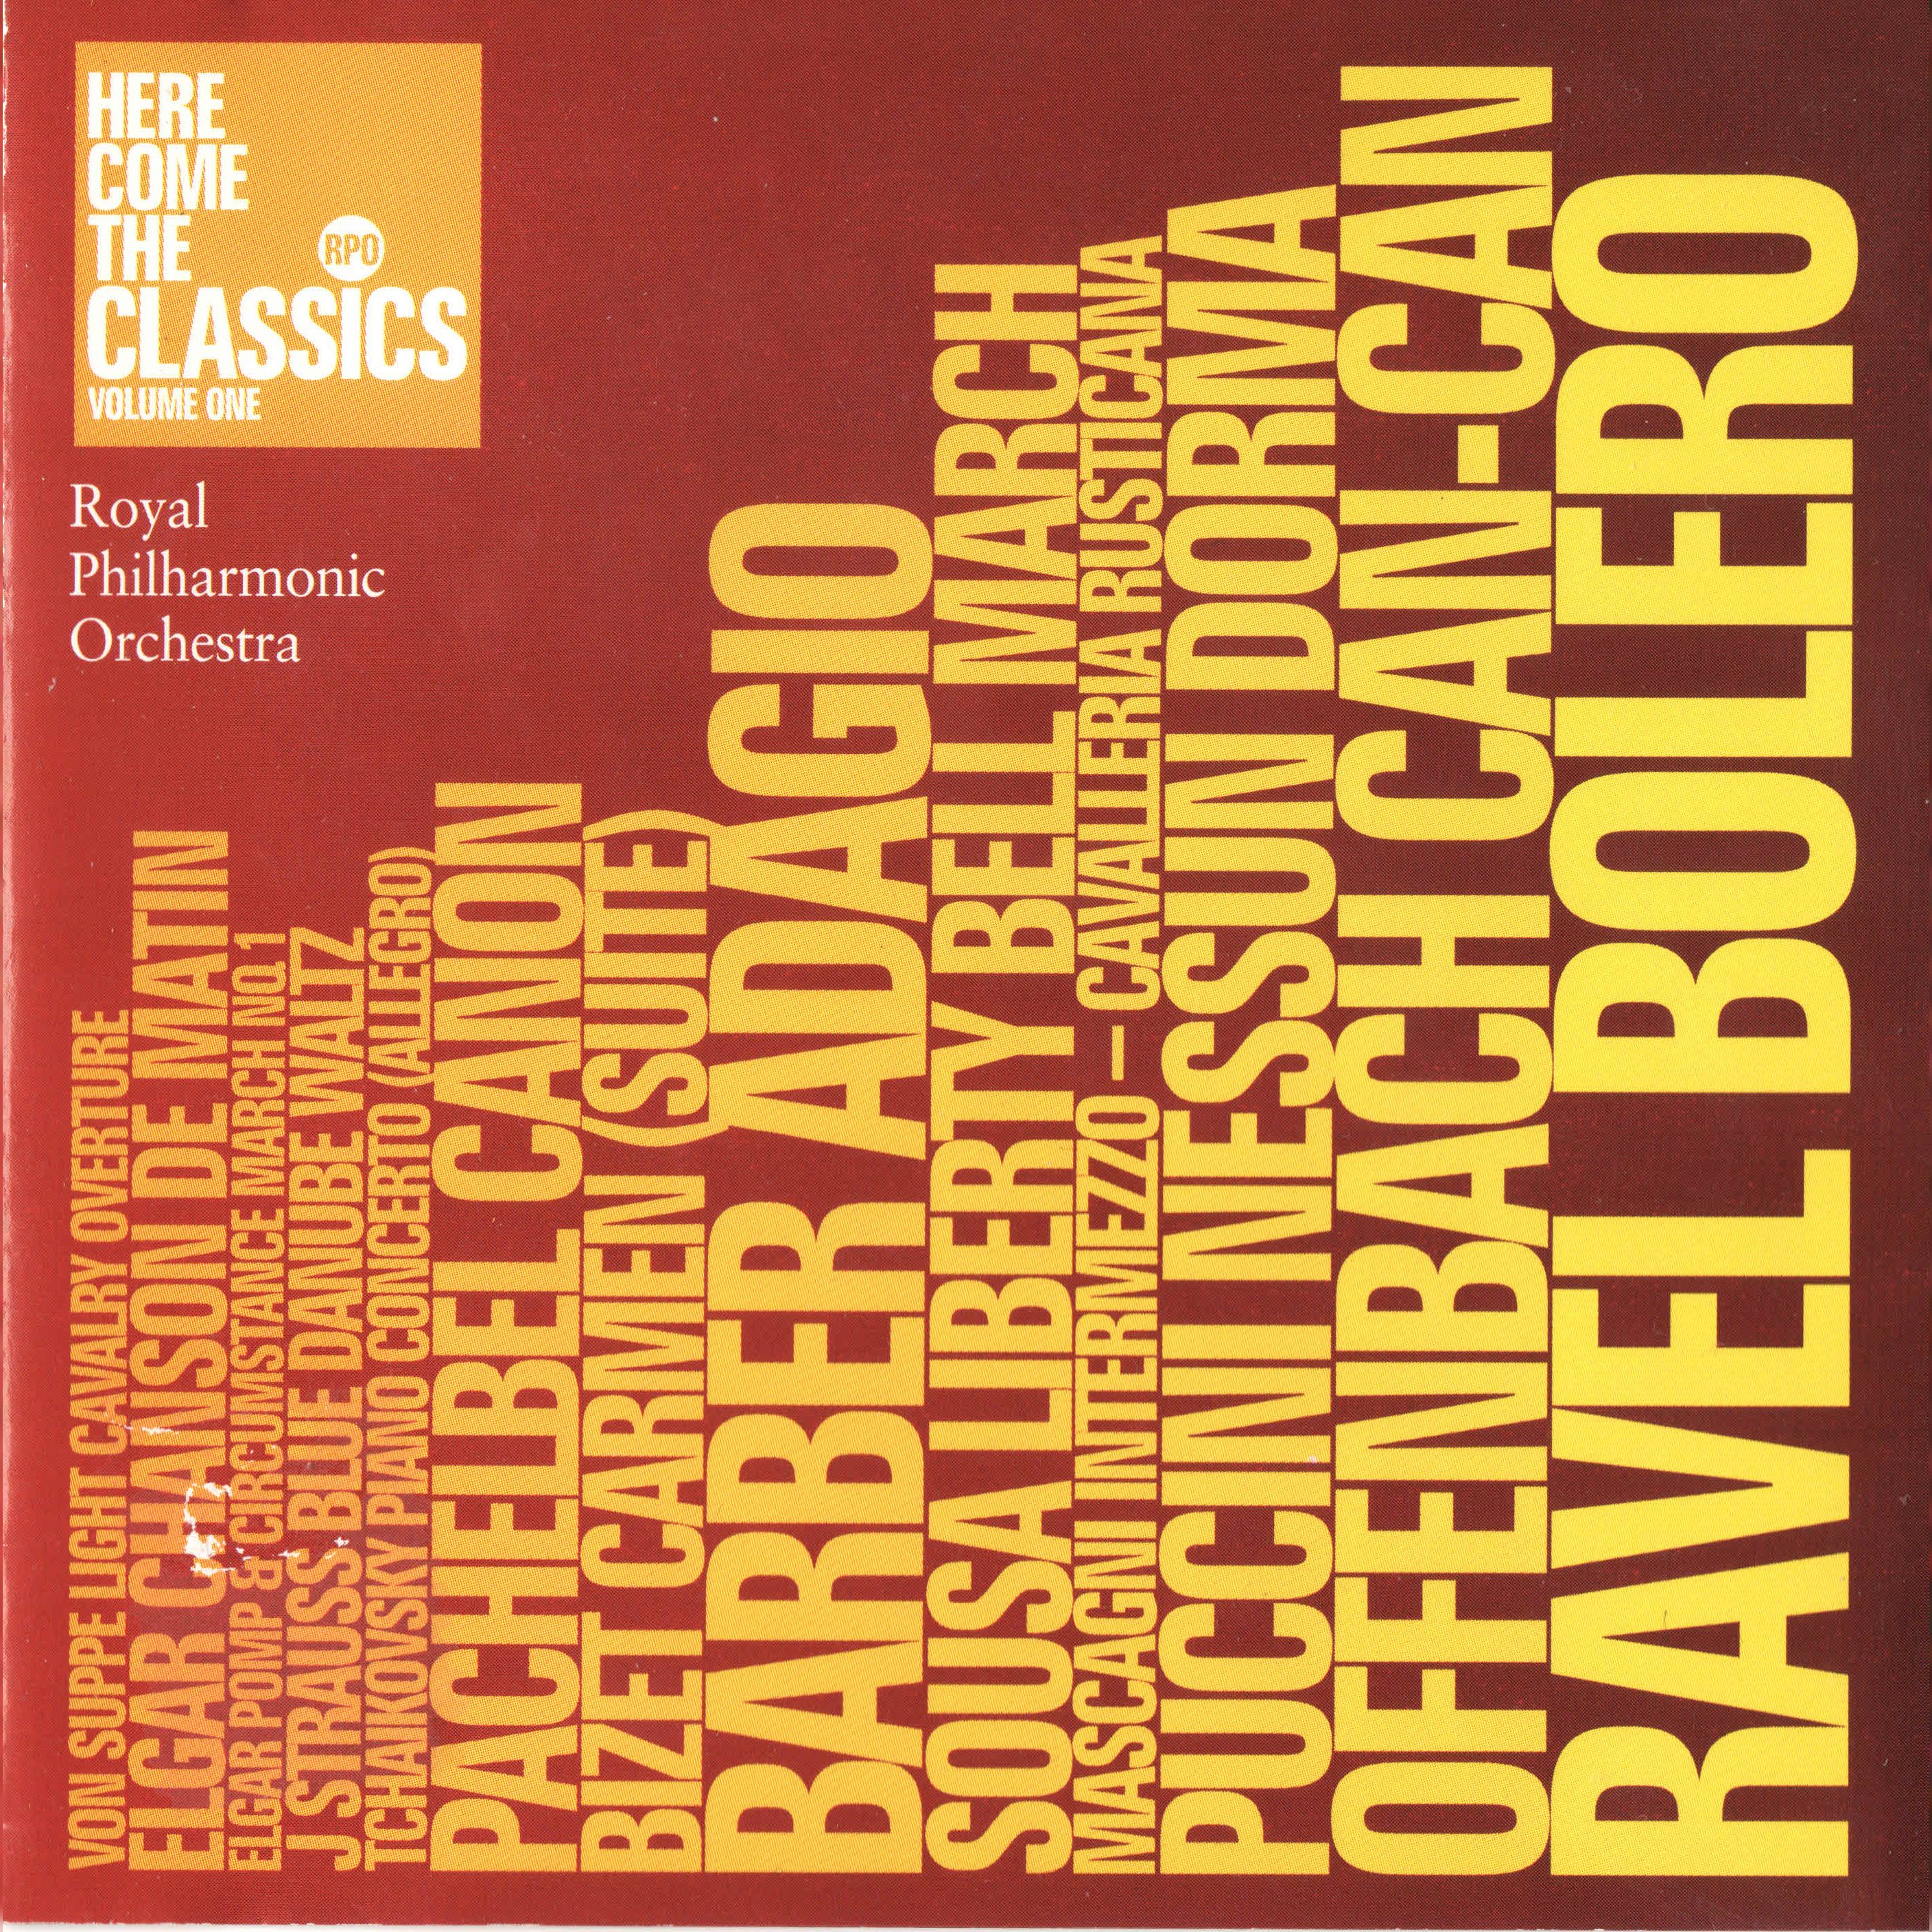 Royal Philharmonic Orchestra 'Here Come The Classics Vol 1' CD/2003/Classic/ 